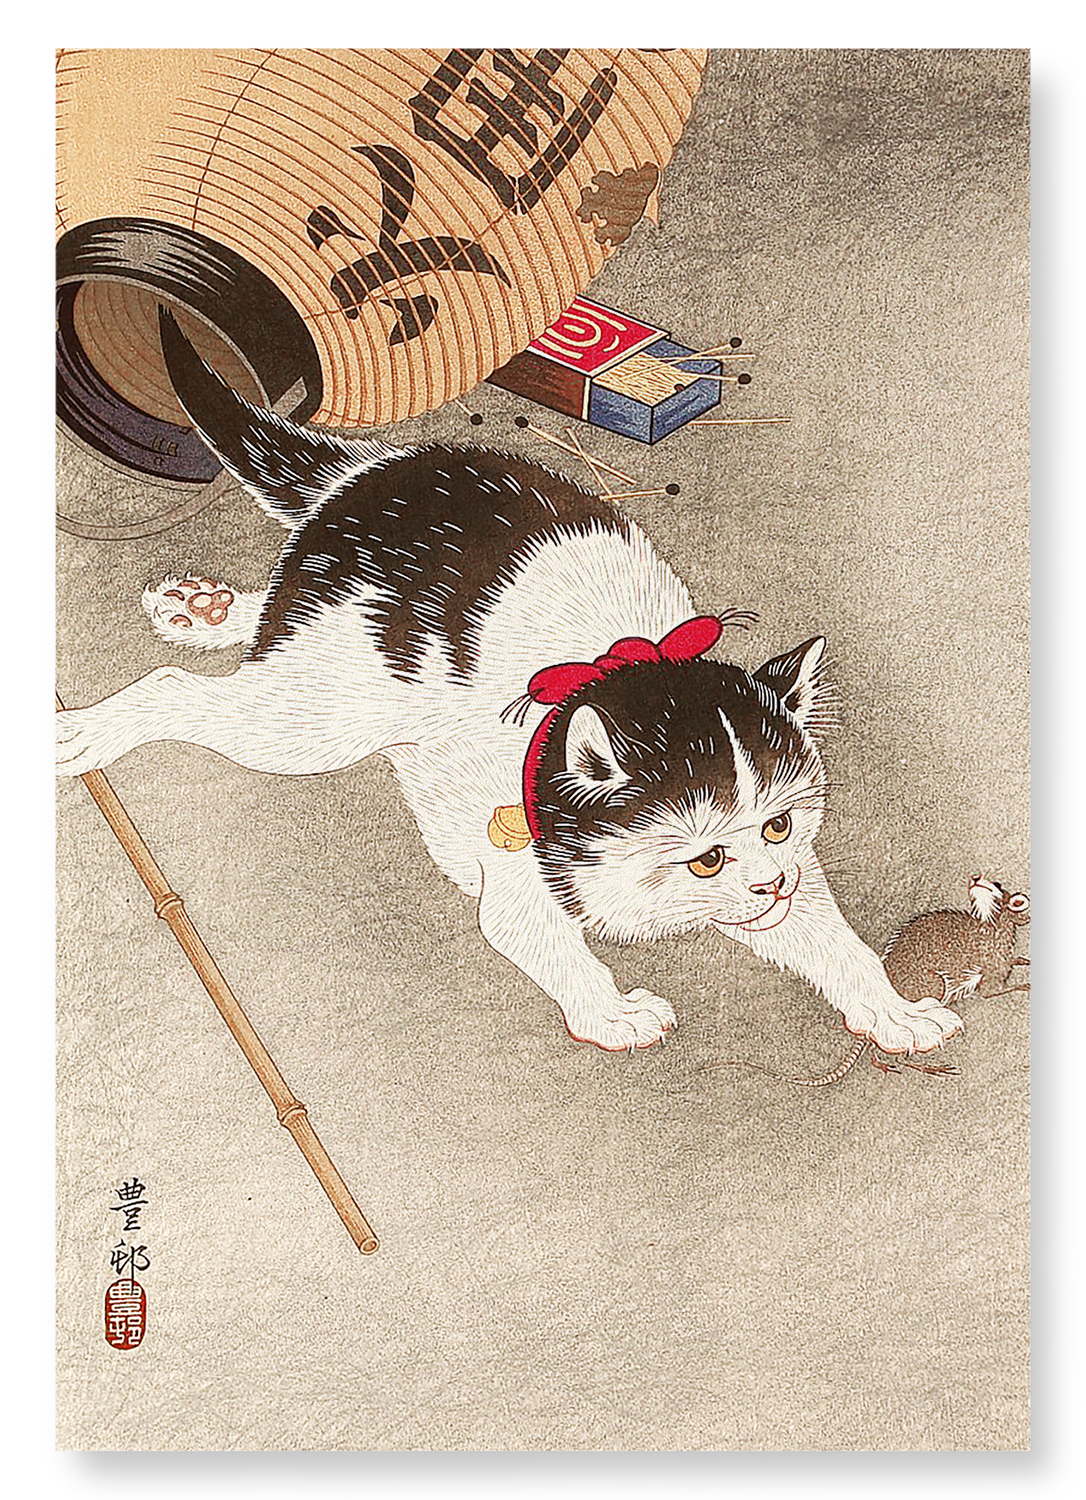 CAT CATCHING A MOUSE: Japanese Art Print